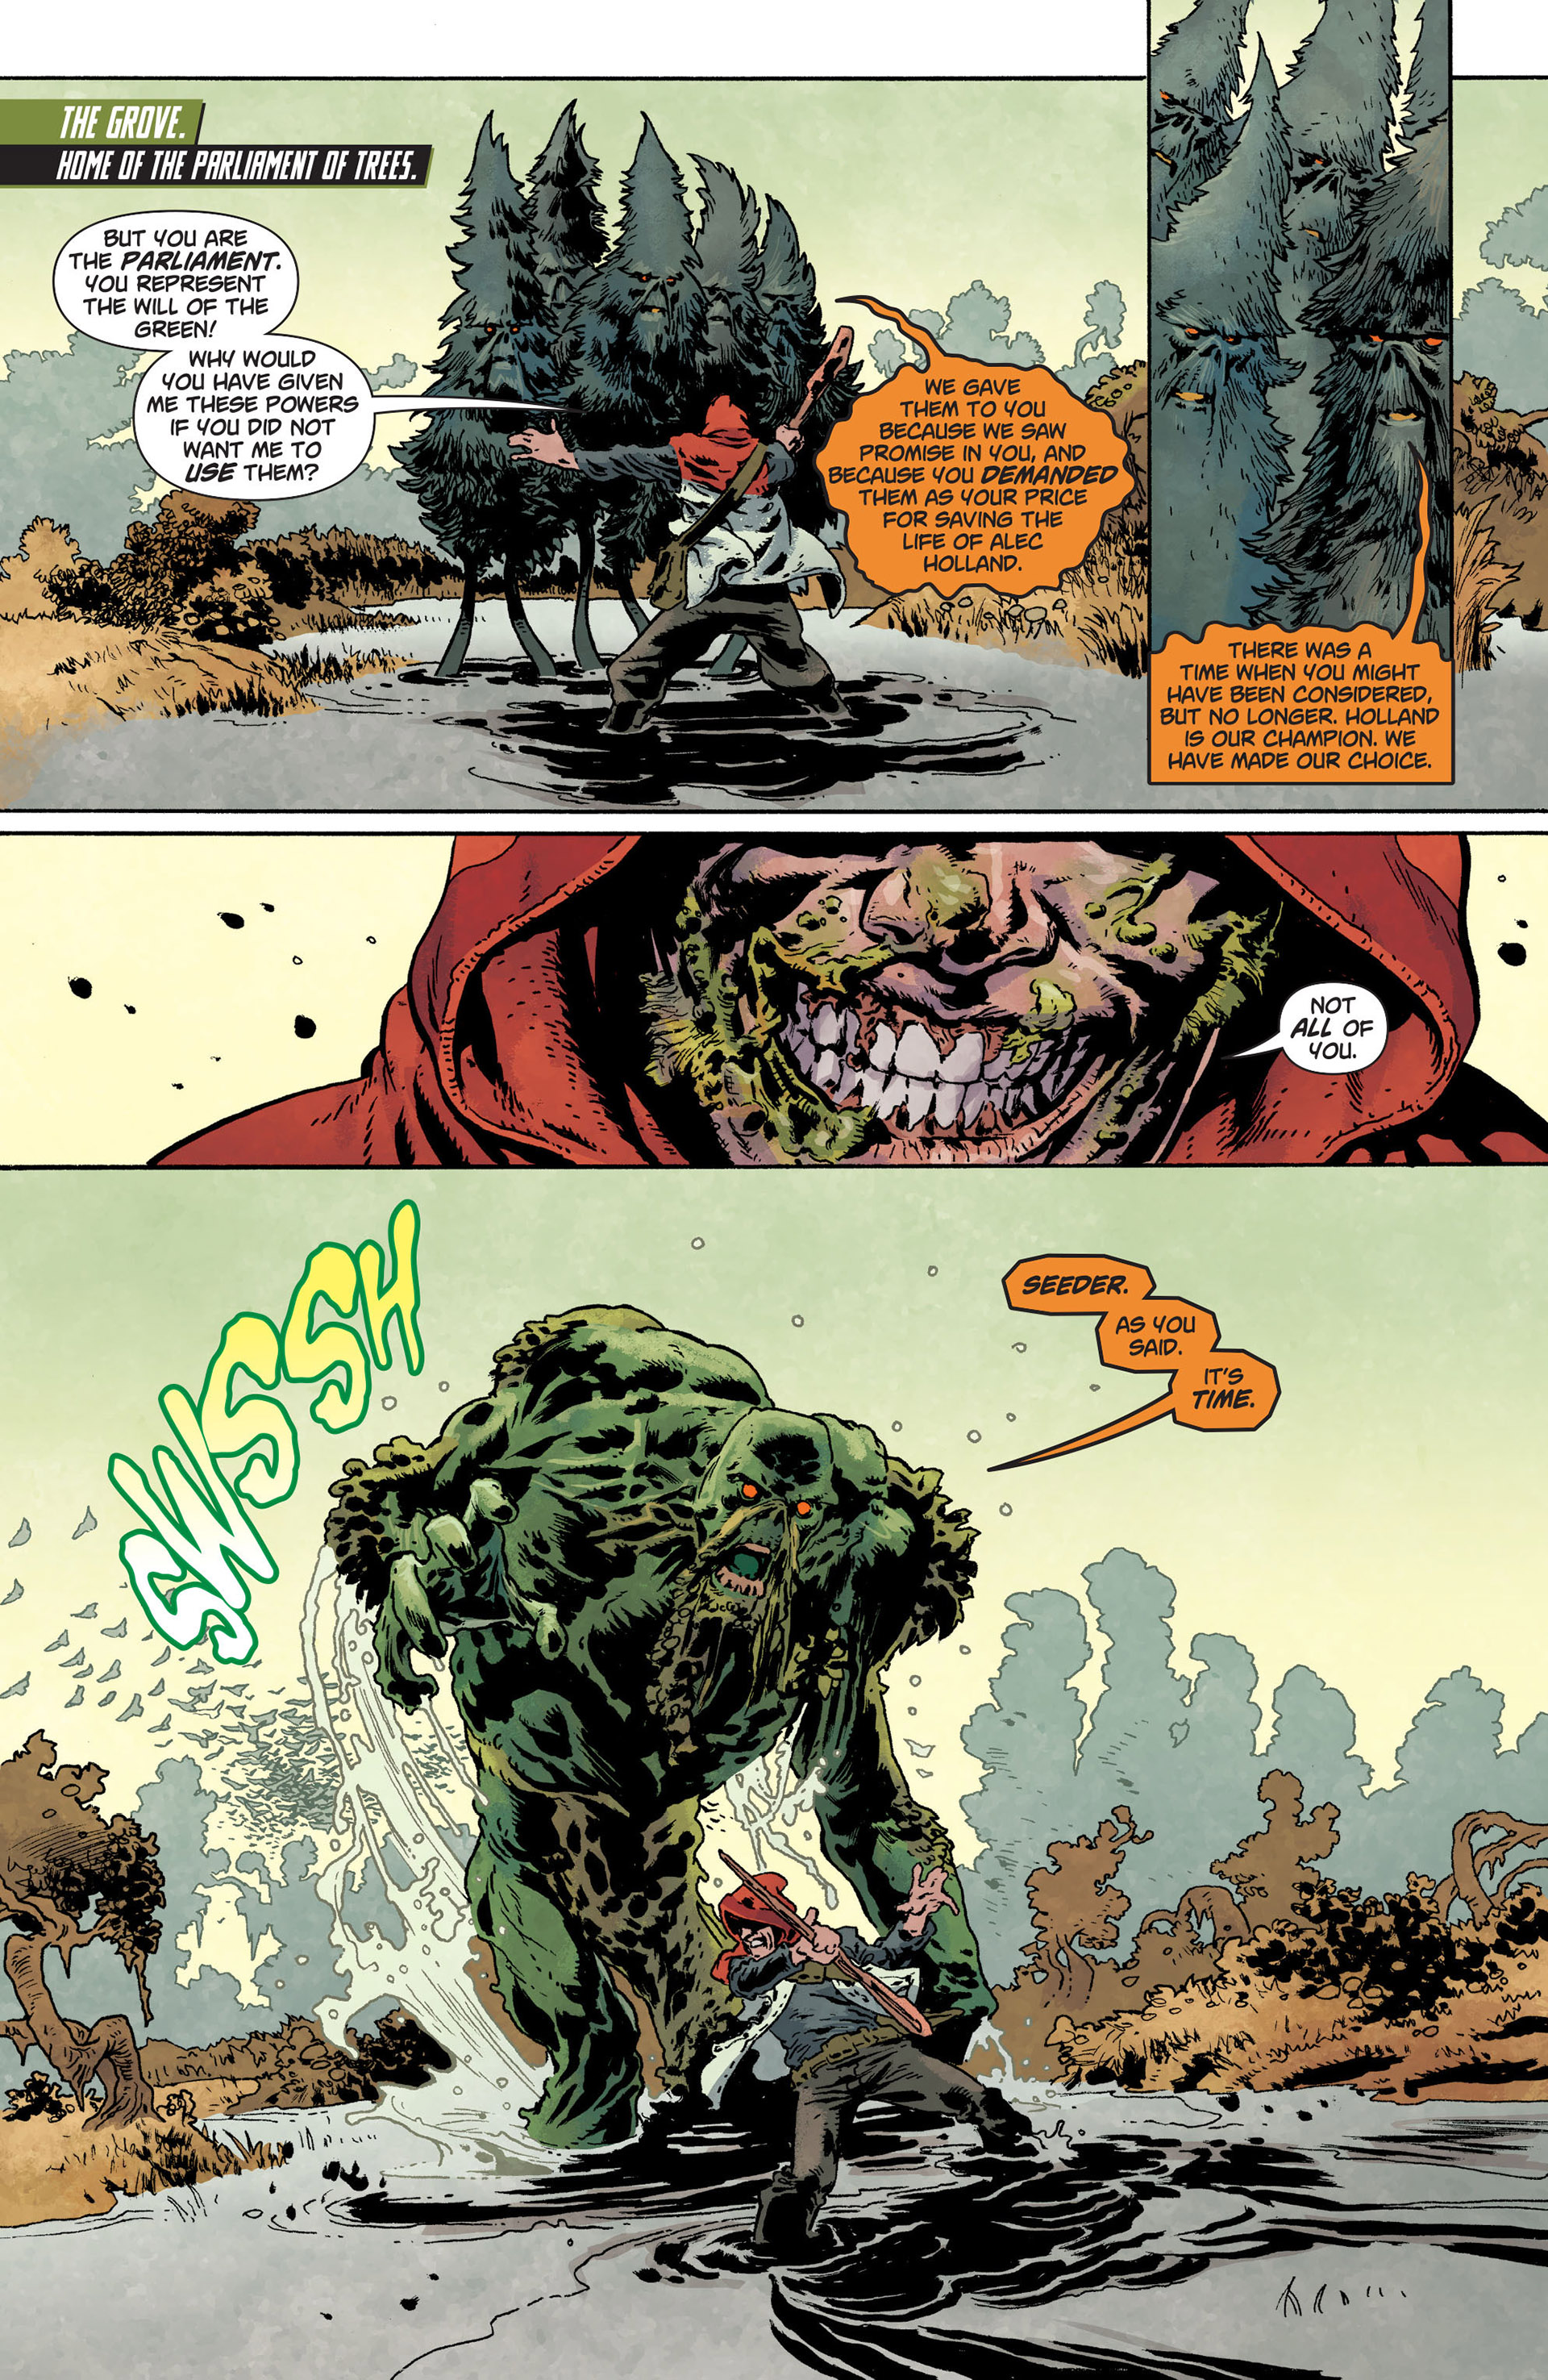 Swamp Thing (2011) 24 Page 7.